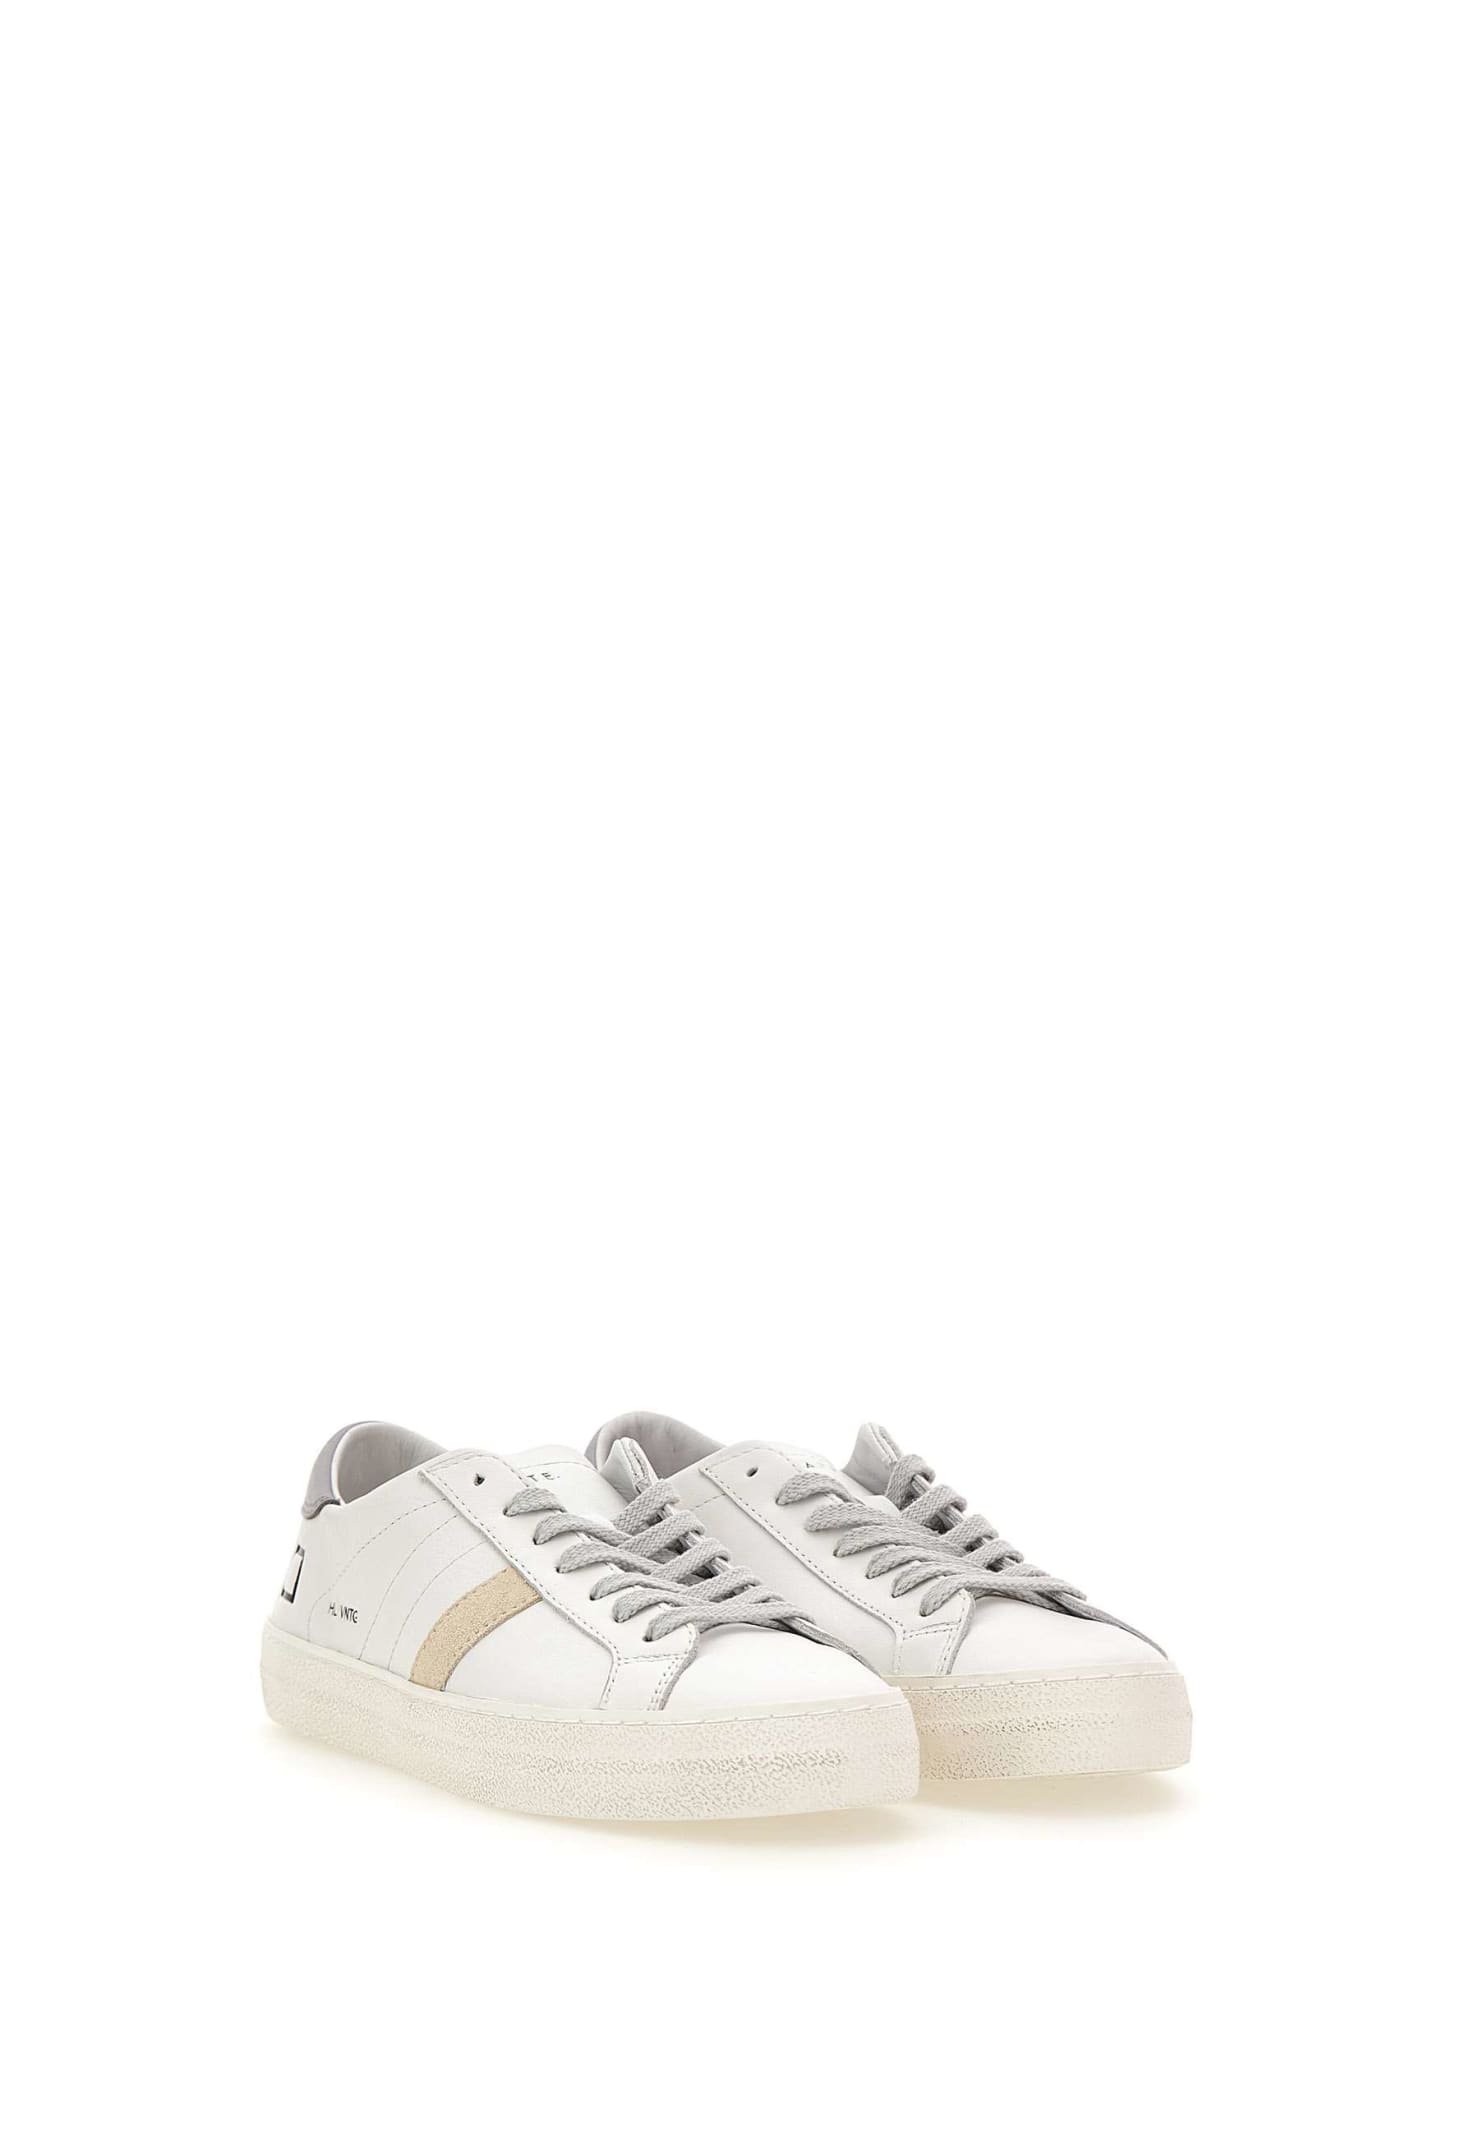 Shop Date Hillow Vintage Sneakers In White-lilac